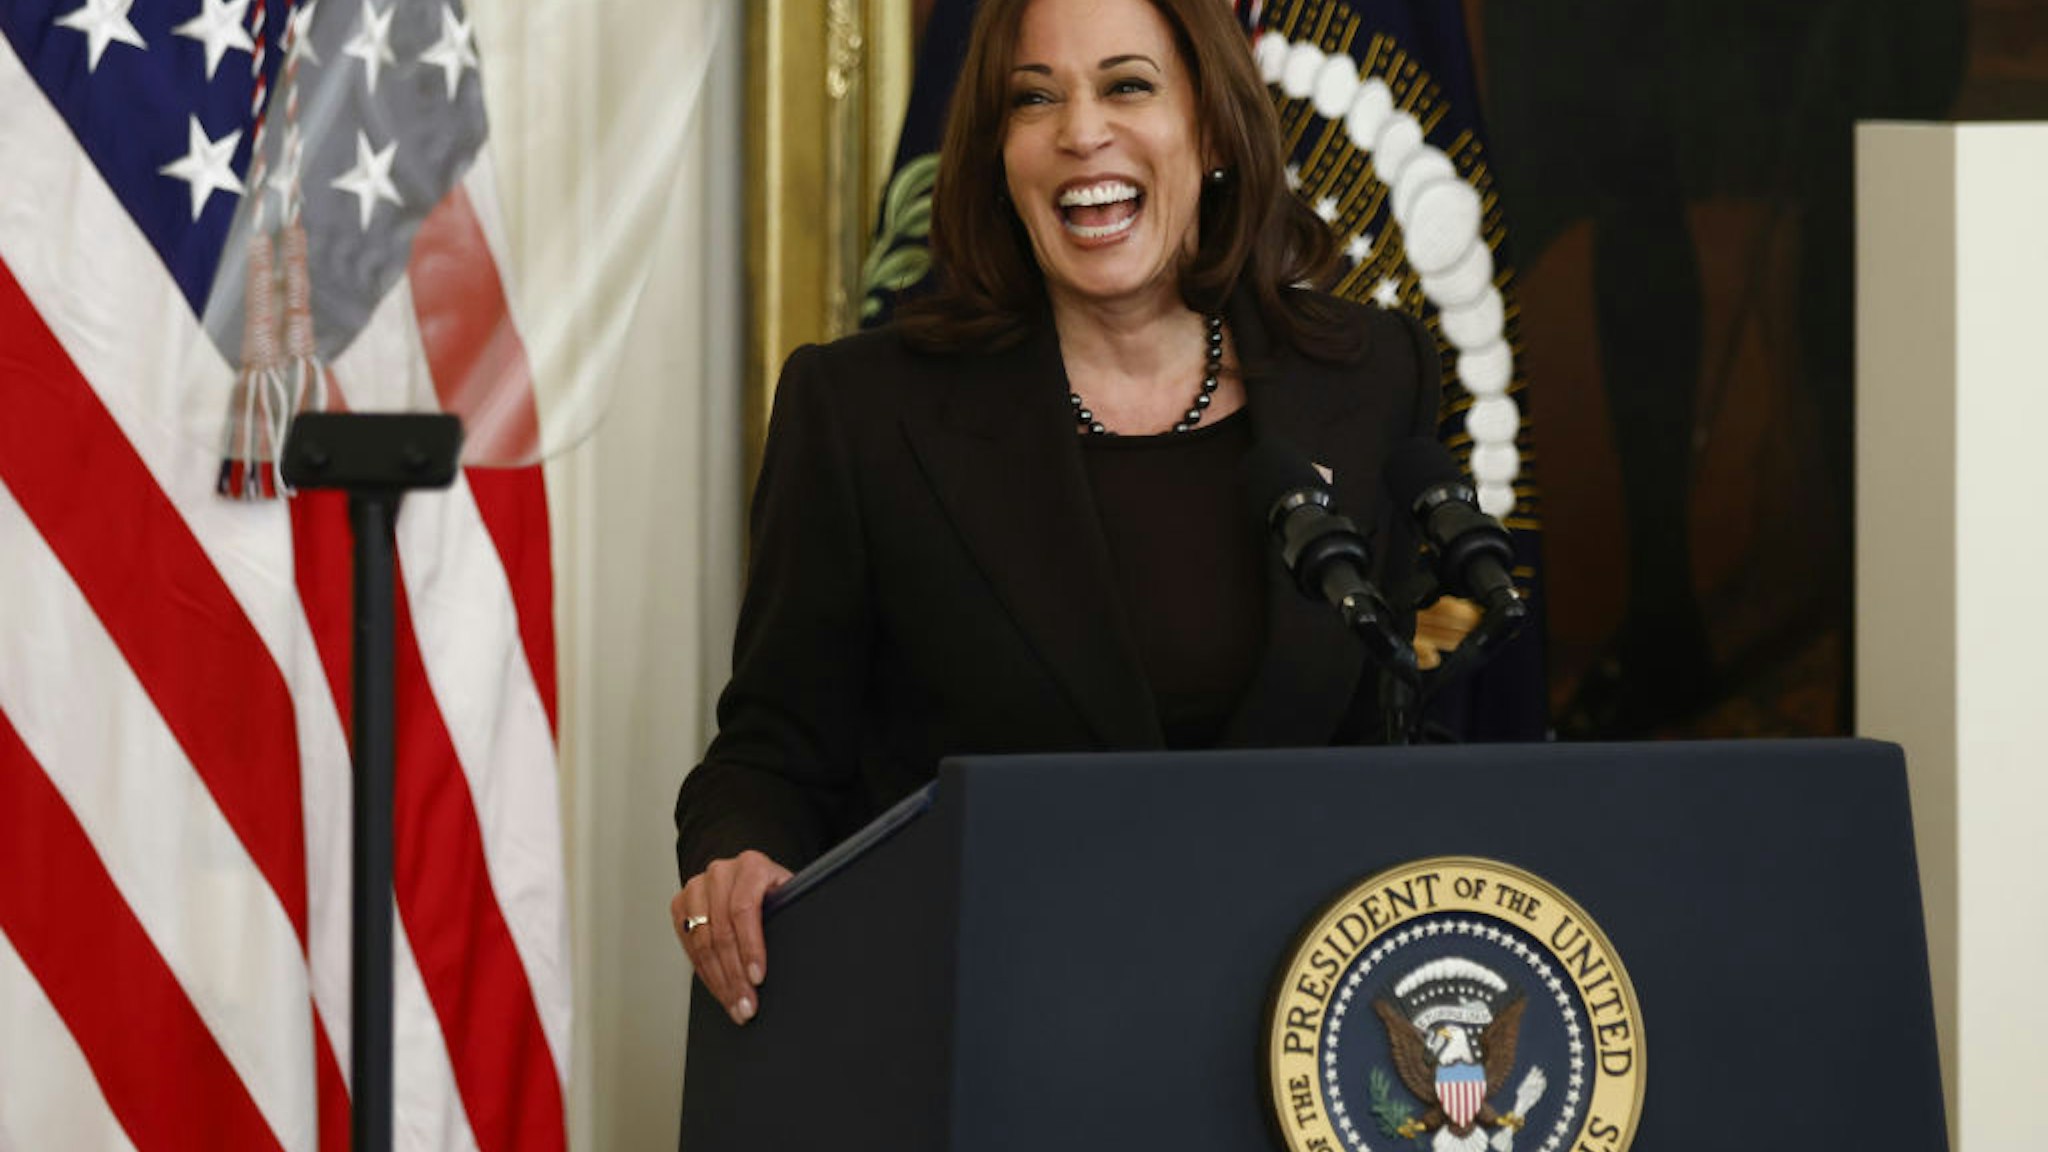 U.S. Vice President Kamala Harris speaks during a Black History Month celebration in the East Room of the White House in Washington, D.C., U.S., on Monday, Feb. 28, 2022. Members of the Congressional Black Caucus, Civil Rights leaders and Divine Nine leadership were also in attendance Photographer: Ting Shen/Bloomberg via Getty Images